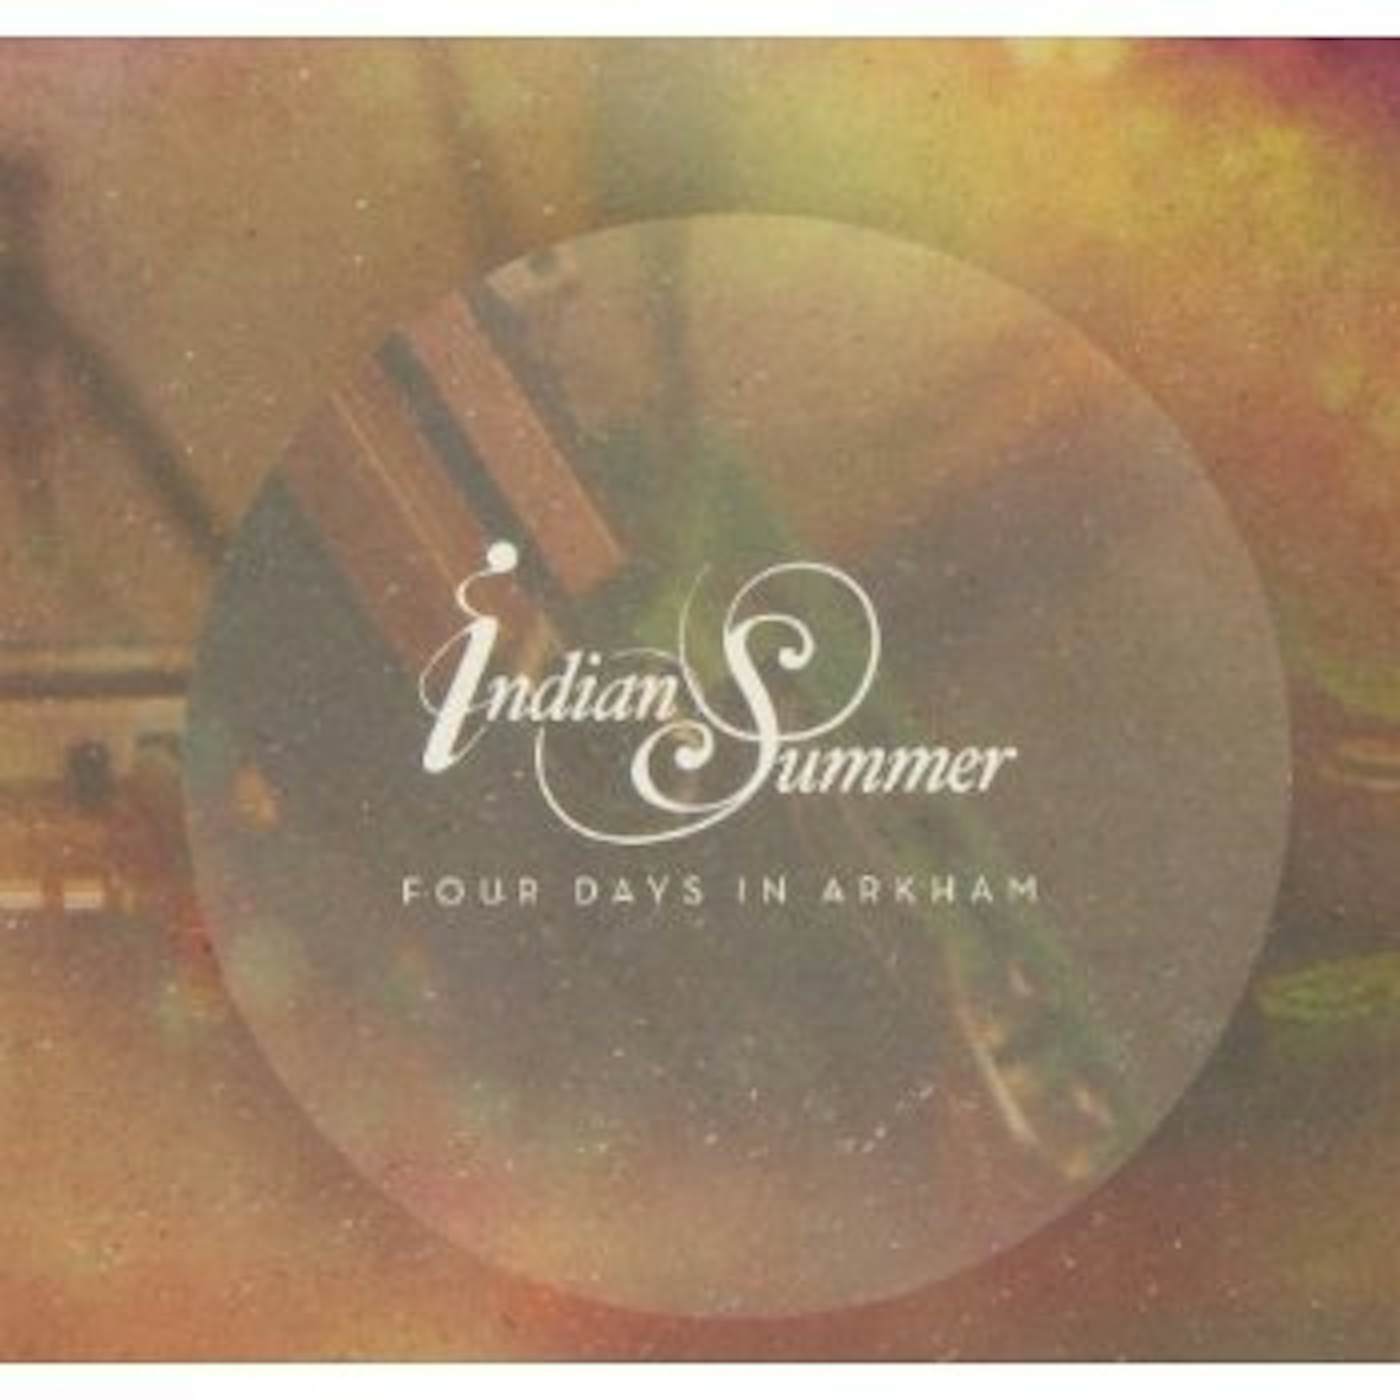 Indian Summer FOUR DAYS IN ARKHAM CD